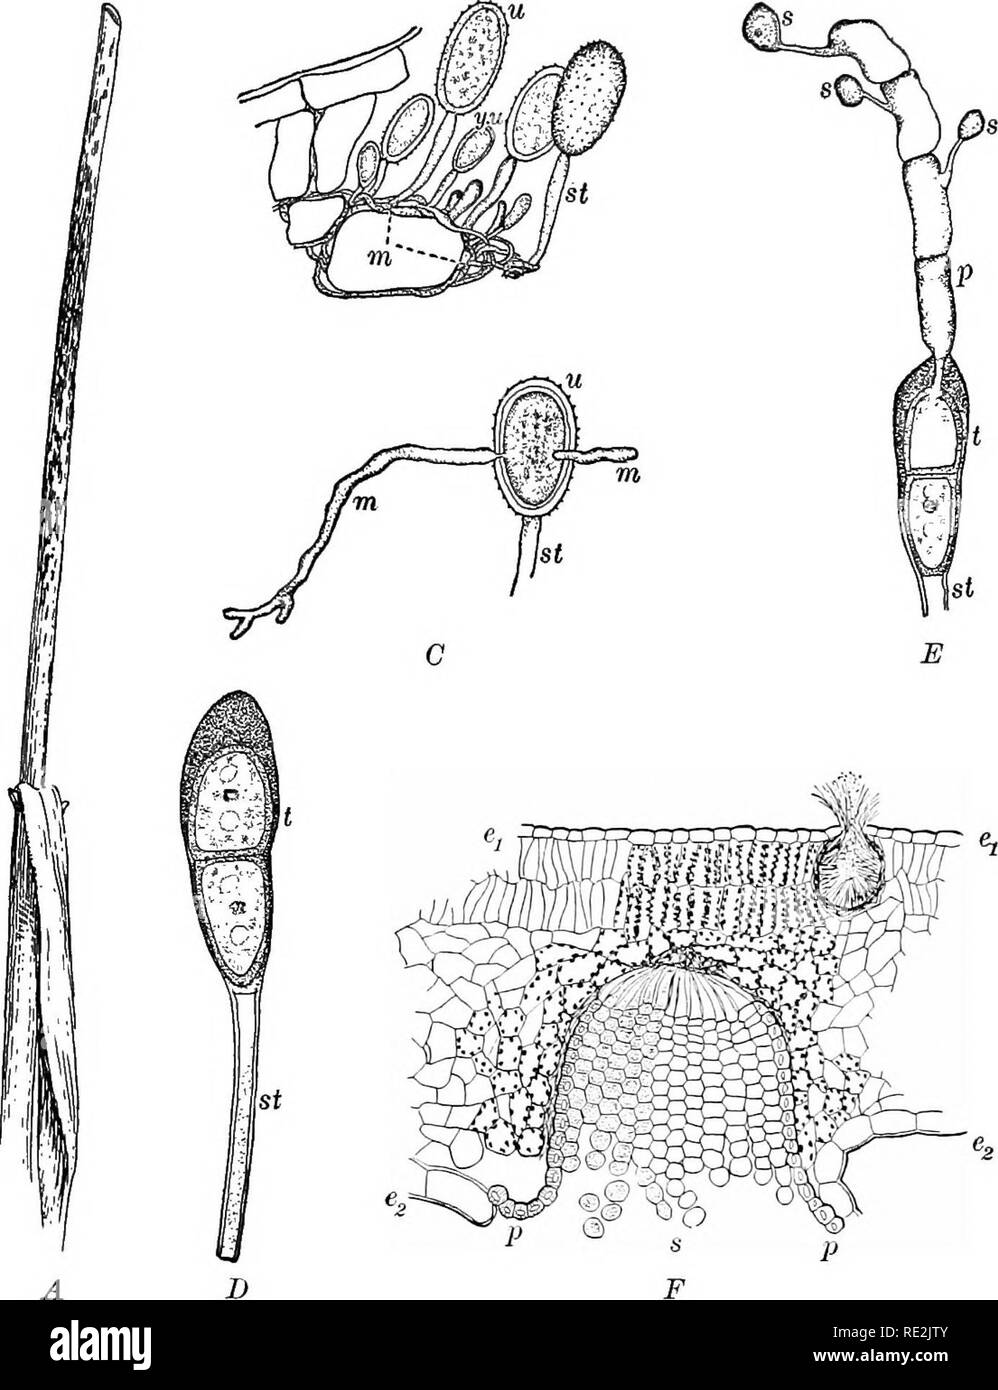 . Introduction to botany. Botany. Fig. 198. Wheat rust (Puccinla graminis) A, part of a wheat plant showing rust spots on the stalk. B, a small section of a wheat leaf upon which the parasitic rust is growing: m, mycelial hyphte of the rust; y.u, young summer spore, or uredospore; v, fully formed uredospore; st, upright hypha upon which uredospore is formed. C, germination of uredospore: St, old hypha; «, old uredospore wall; m, new mycelial hyphse. D, winter spore, or teleutospore: st, hypha; t, two-celled spore. E, germination of teleutospore (t): St, old hypha; p, new hypha, or the promycel Stock Photo